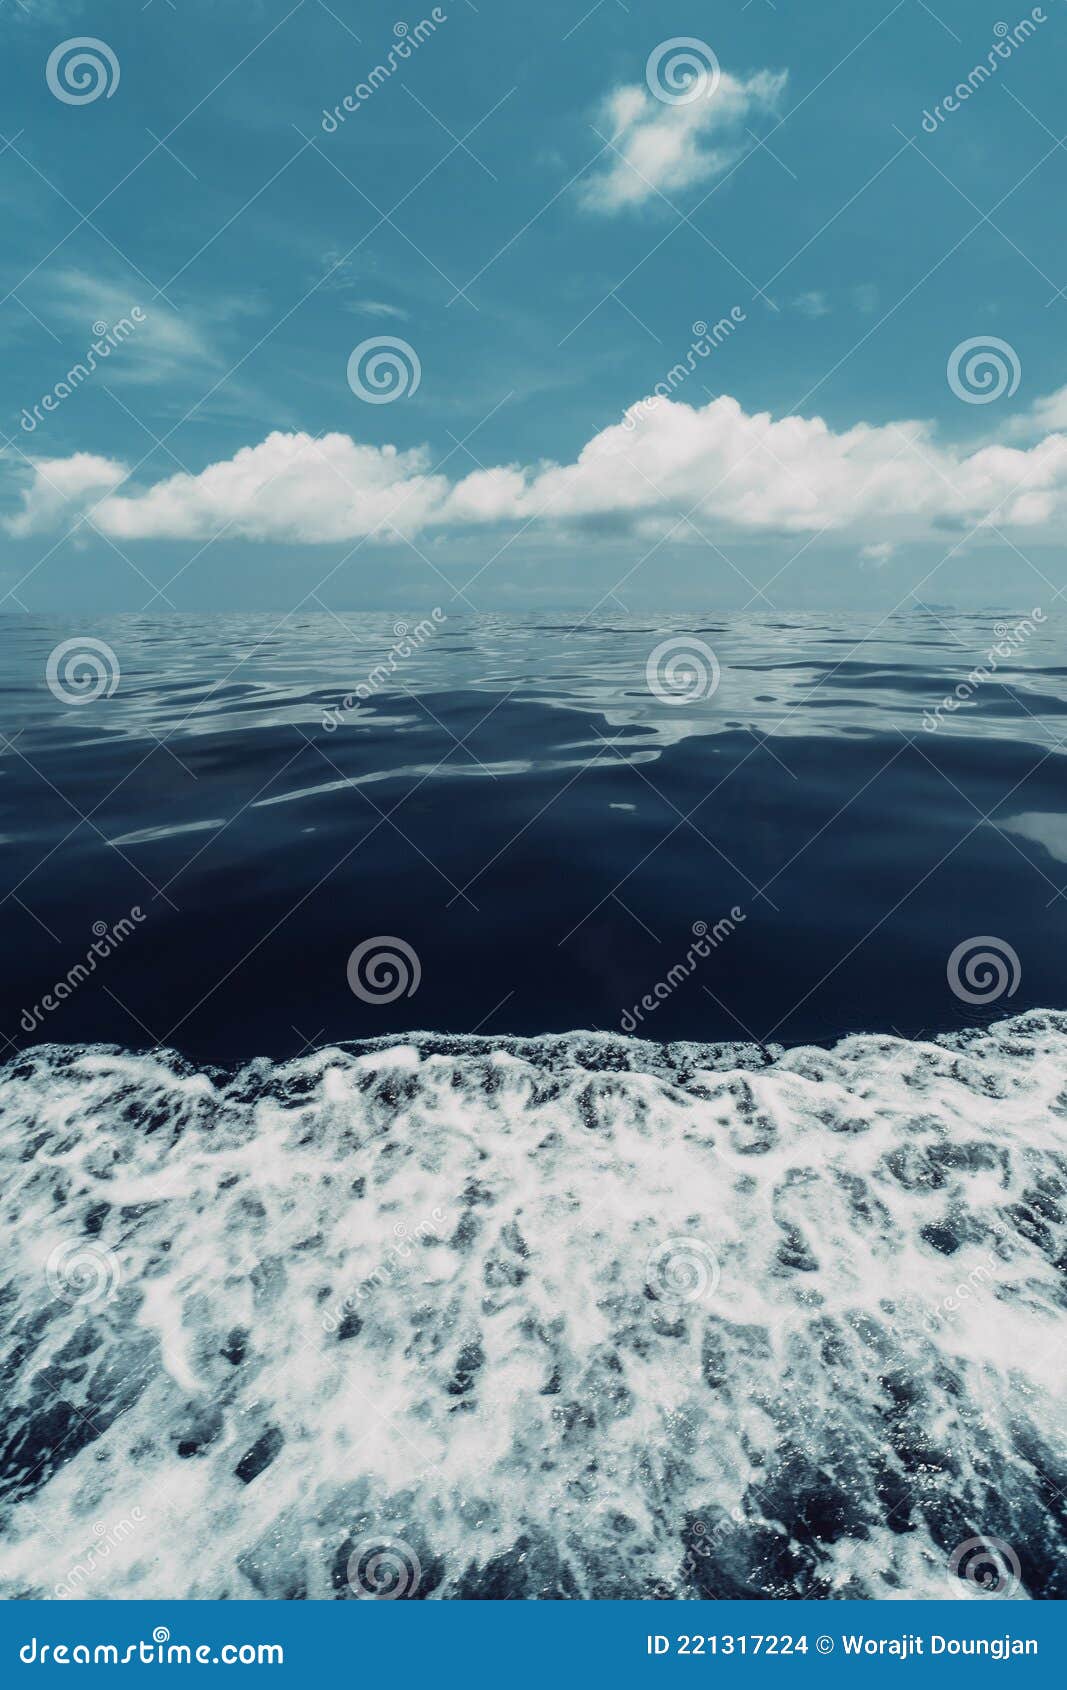 Abstract Sea Background with Copy Space, Blue Ocean Water with ...